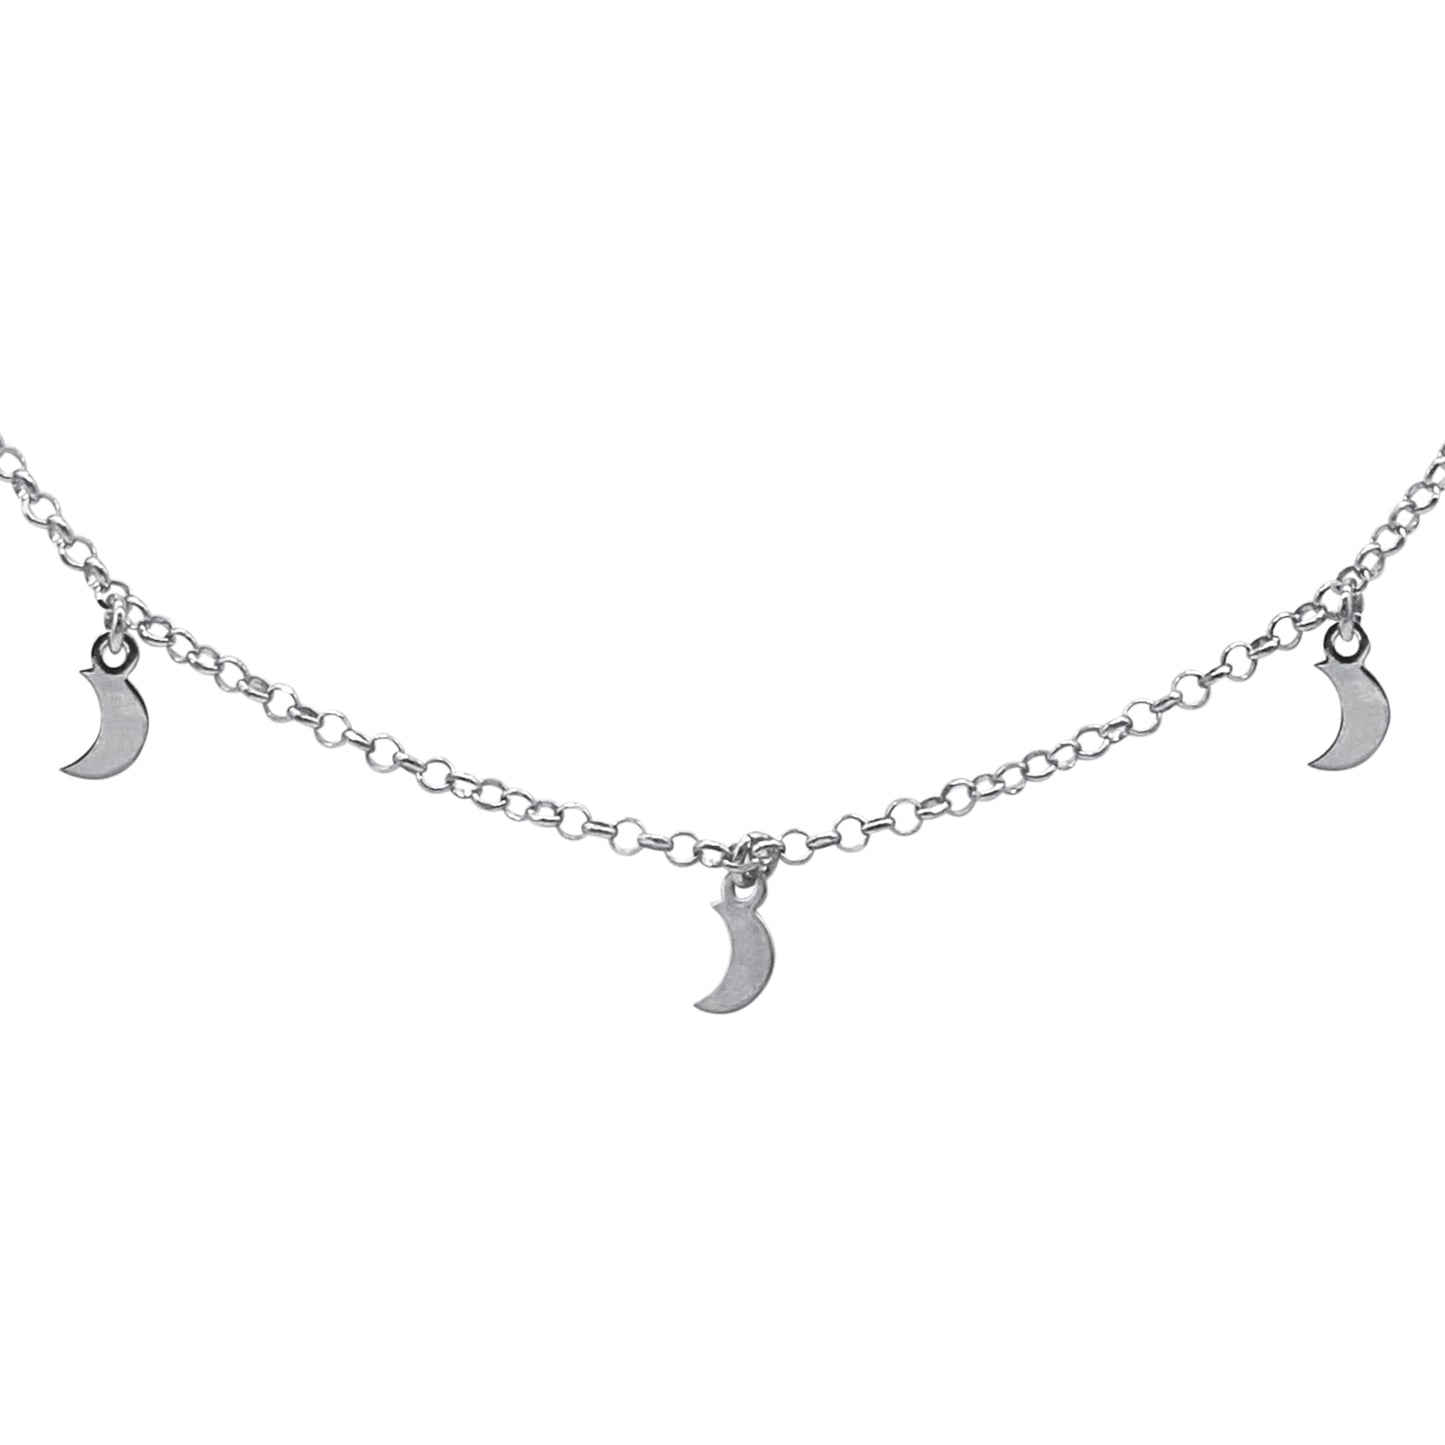 Italian Sterling Silver Dangling Moons Necklace